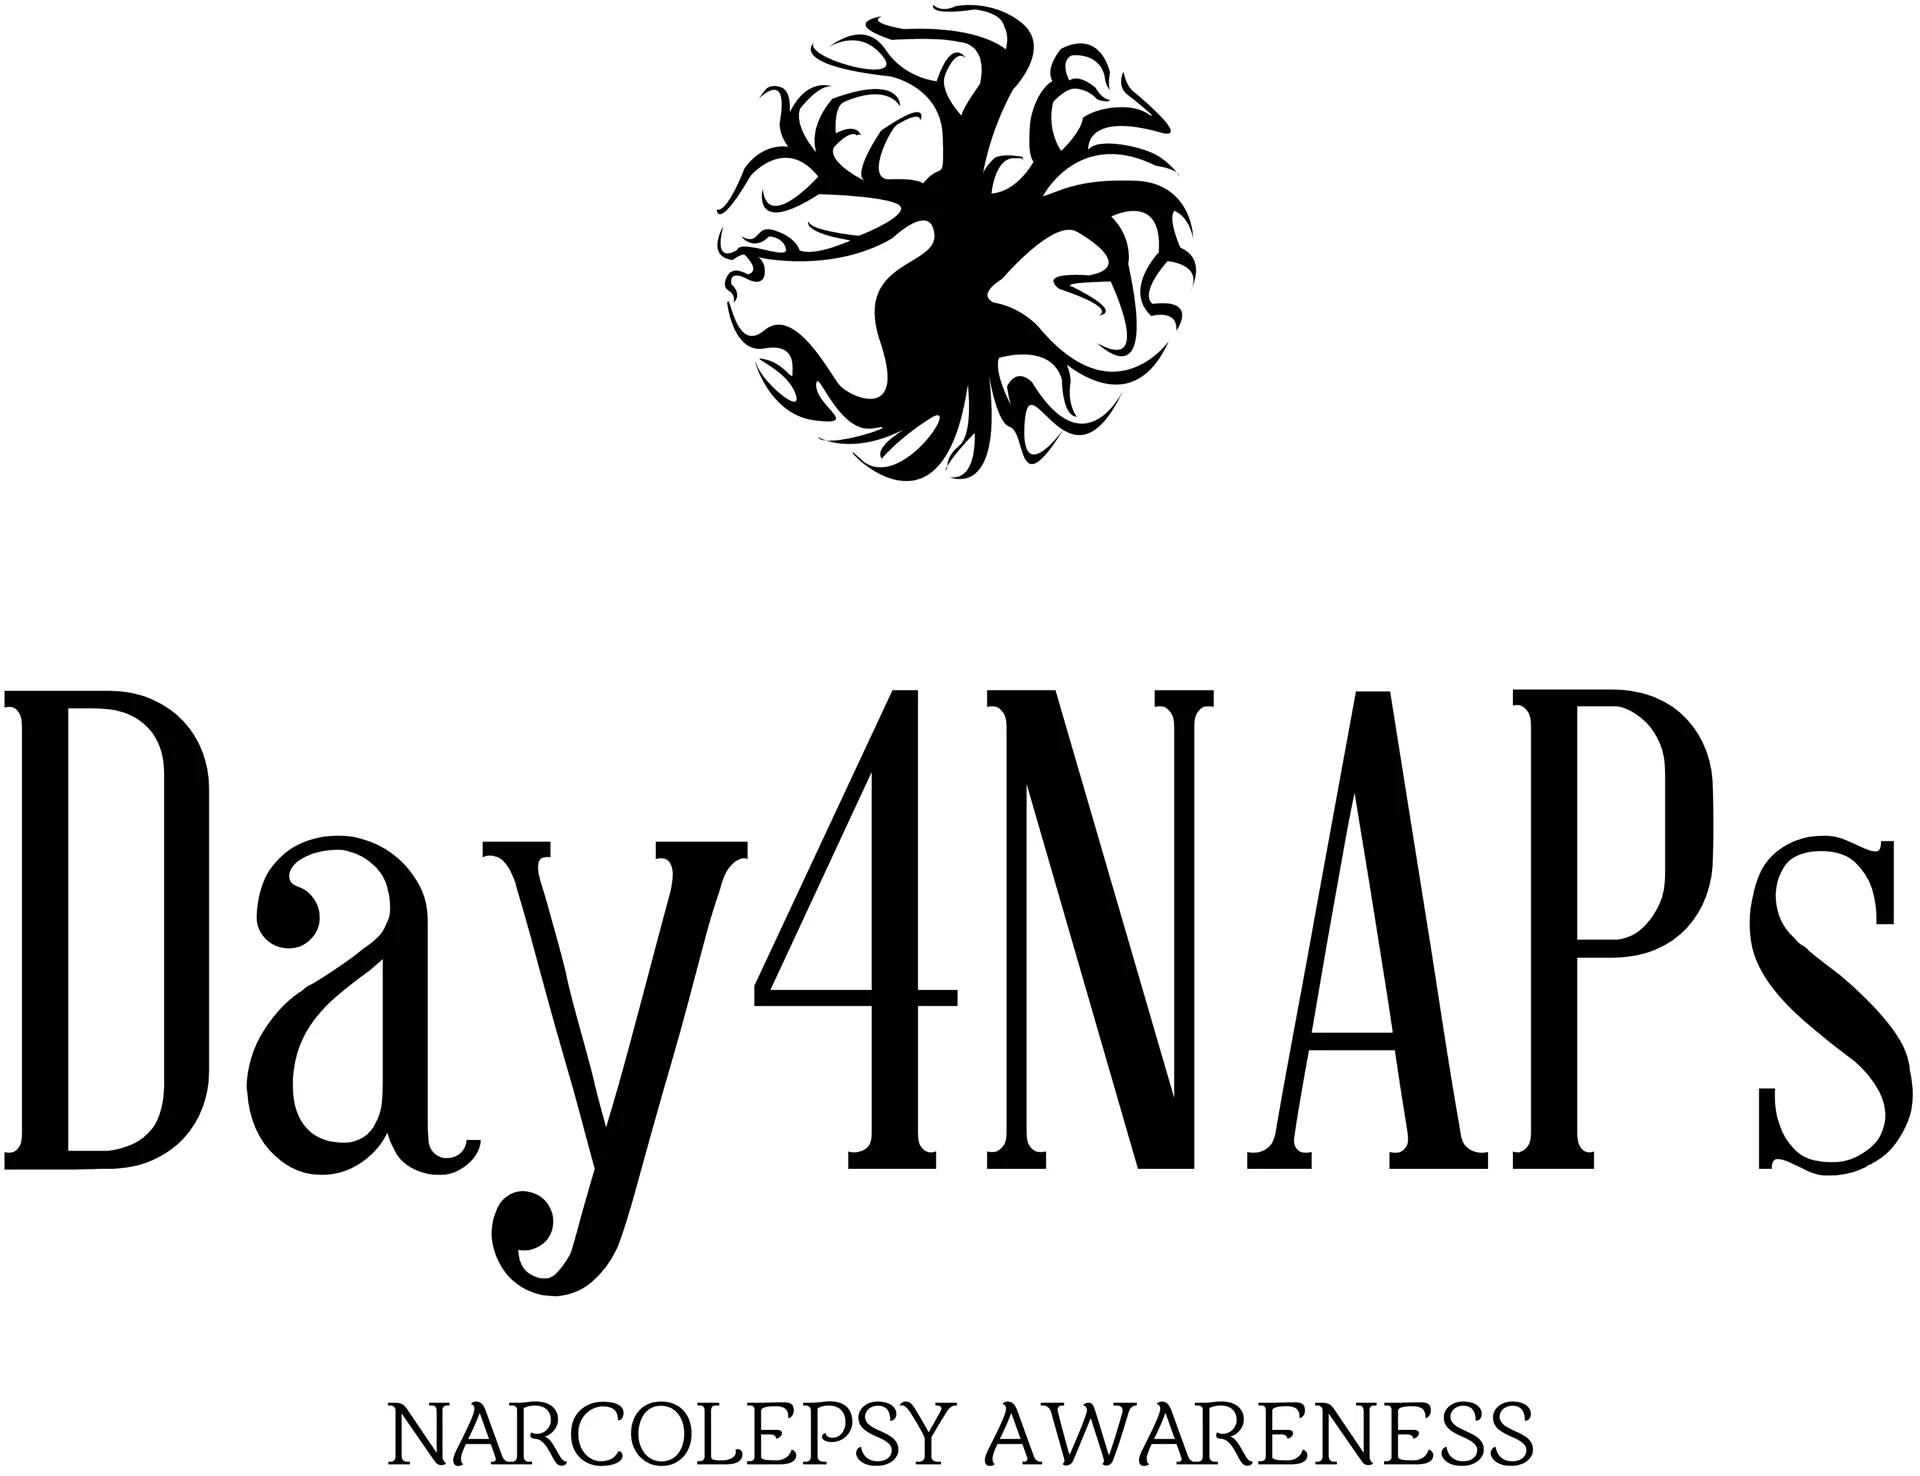 A Day for Narcolepsy Awareness Projects logo